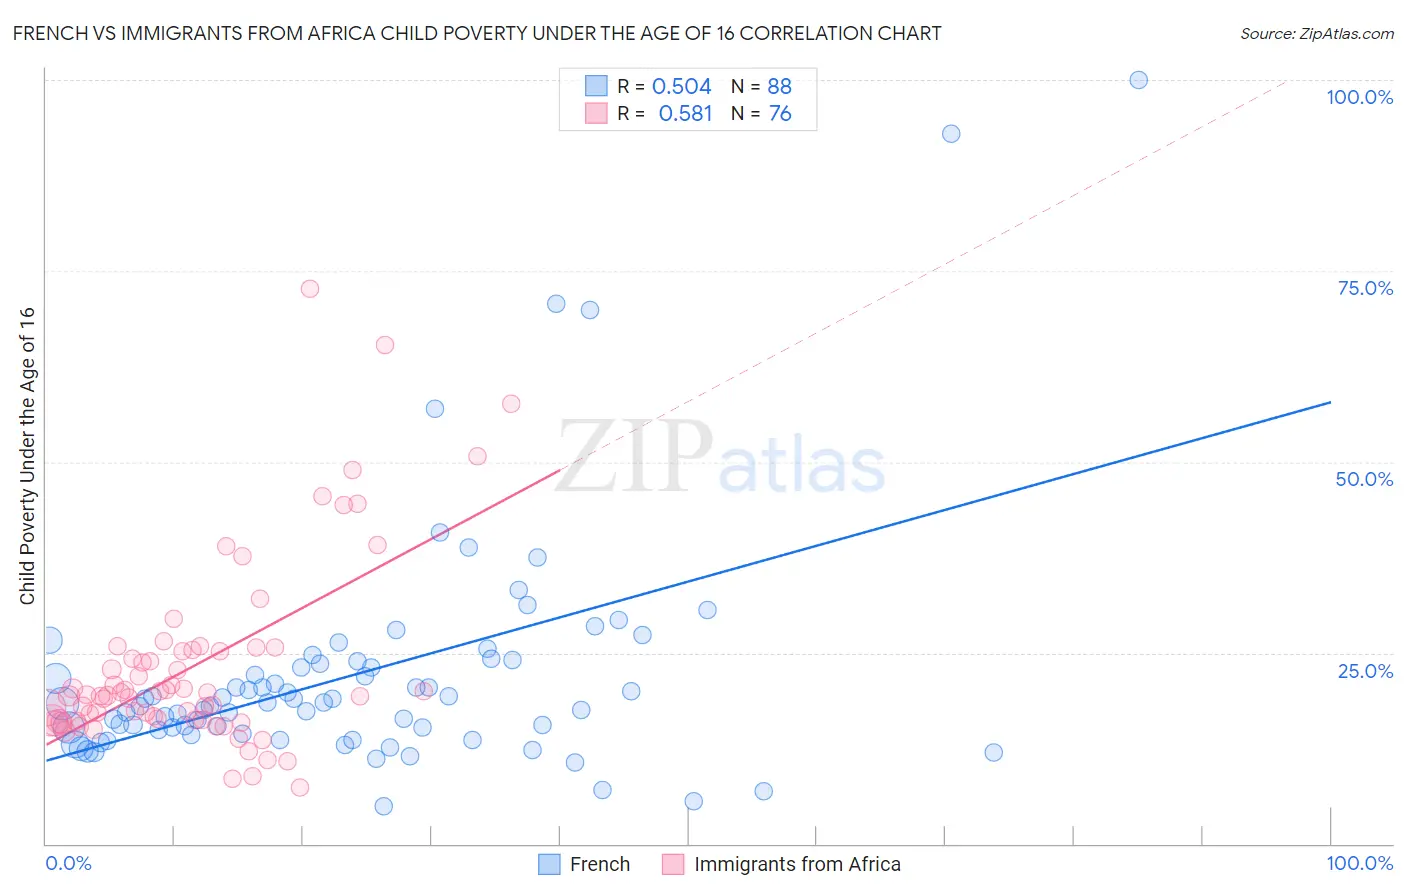 French vs Immigrants from Africa Child Poverty Under the Age of 16